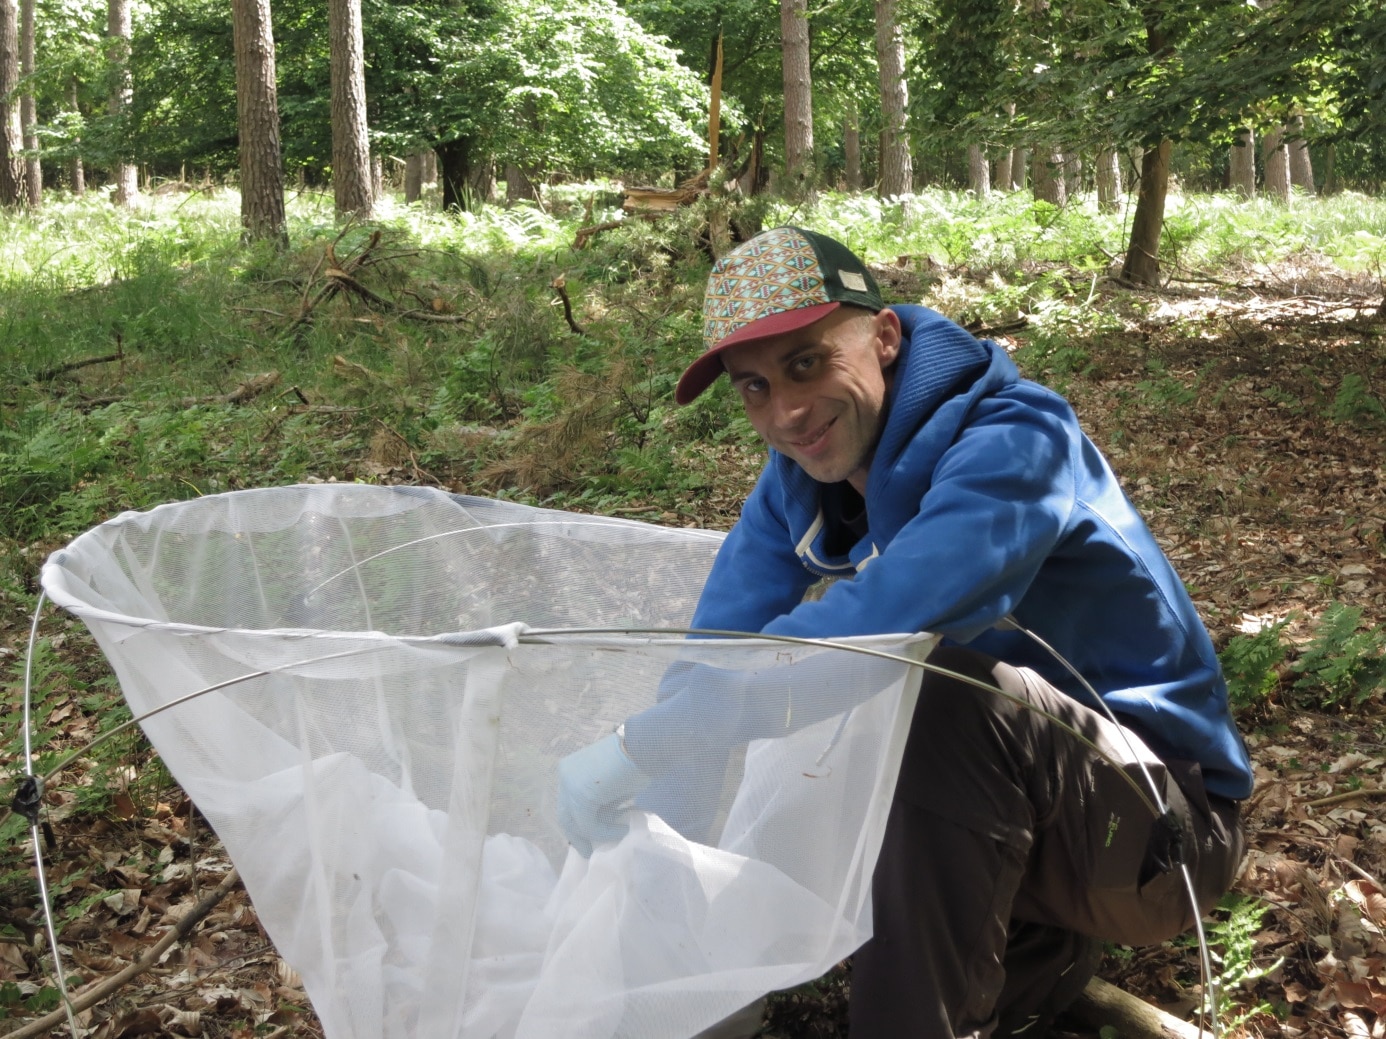 Picture: The photo shows the researcher Steffen Ferber handling a litter trap standing on the ground in a summer forest. The litter trap consists of a white gauze bag suspended in a round frame made of thin metal struts. The diameter of the trap opening is about sixty to seventy centimetres.